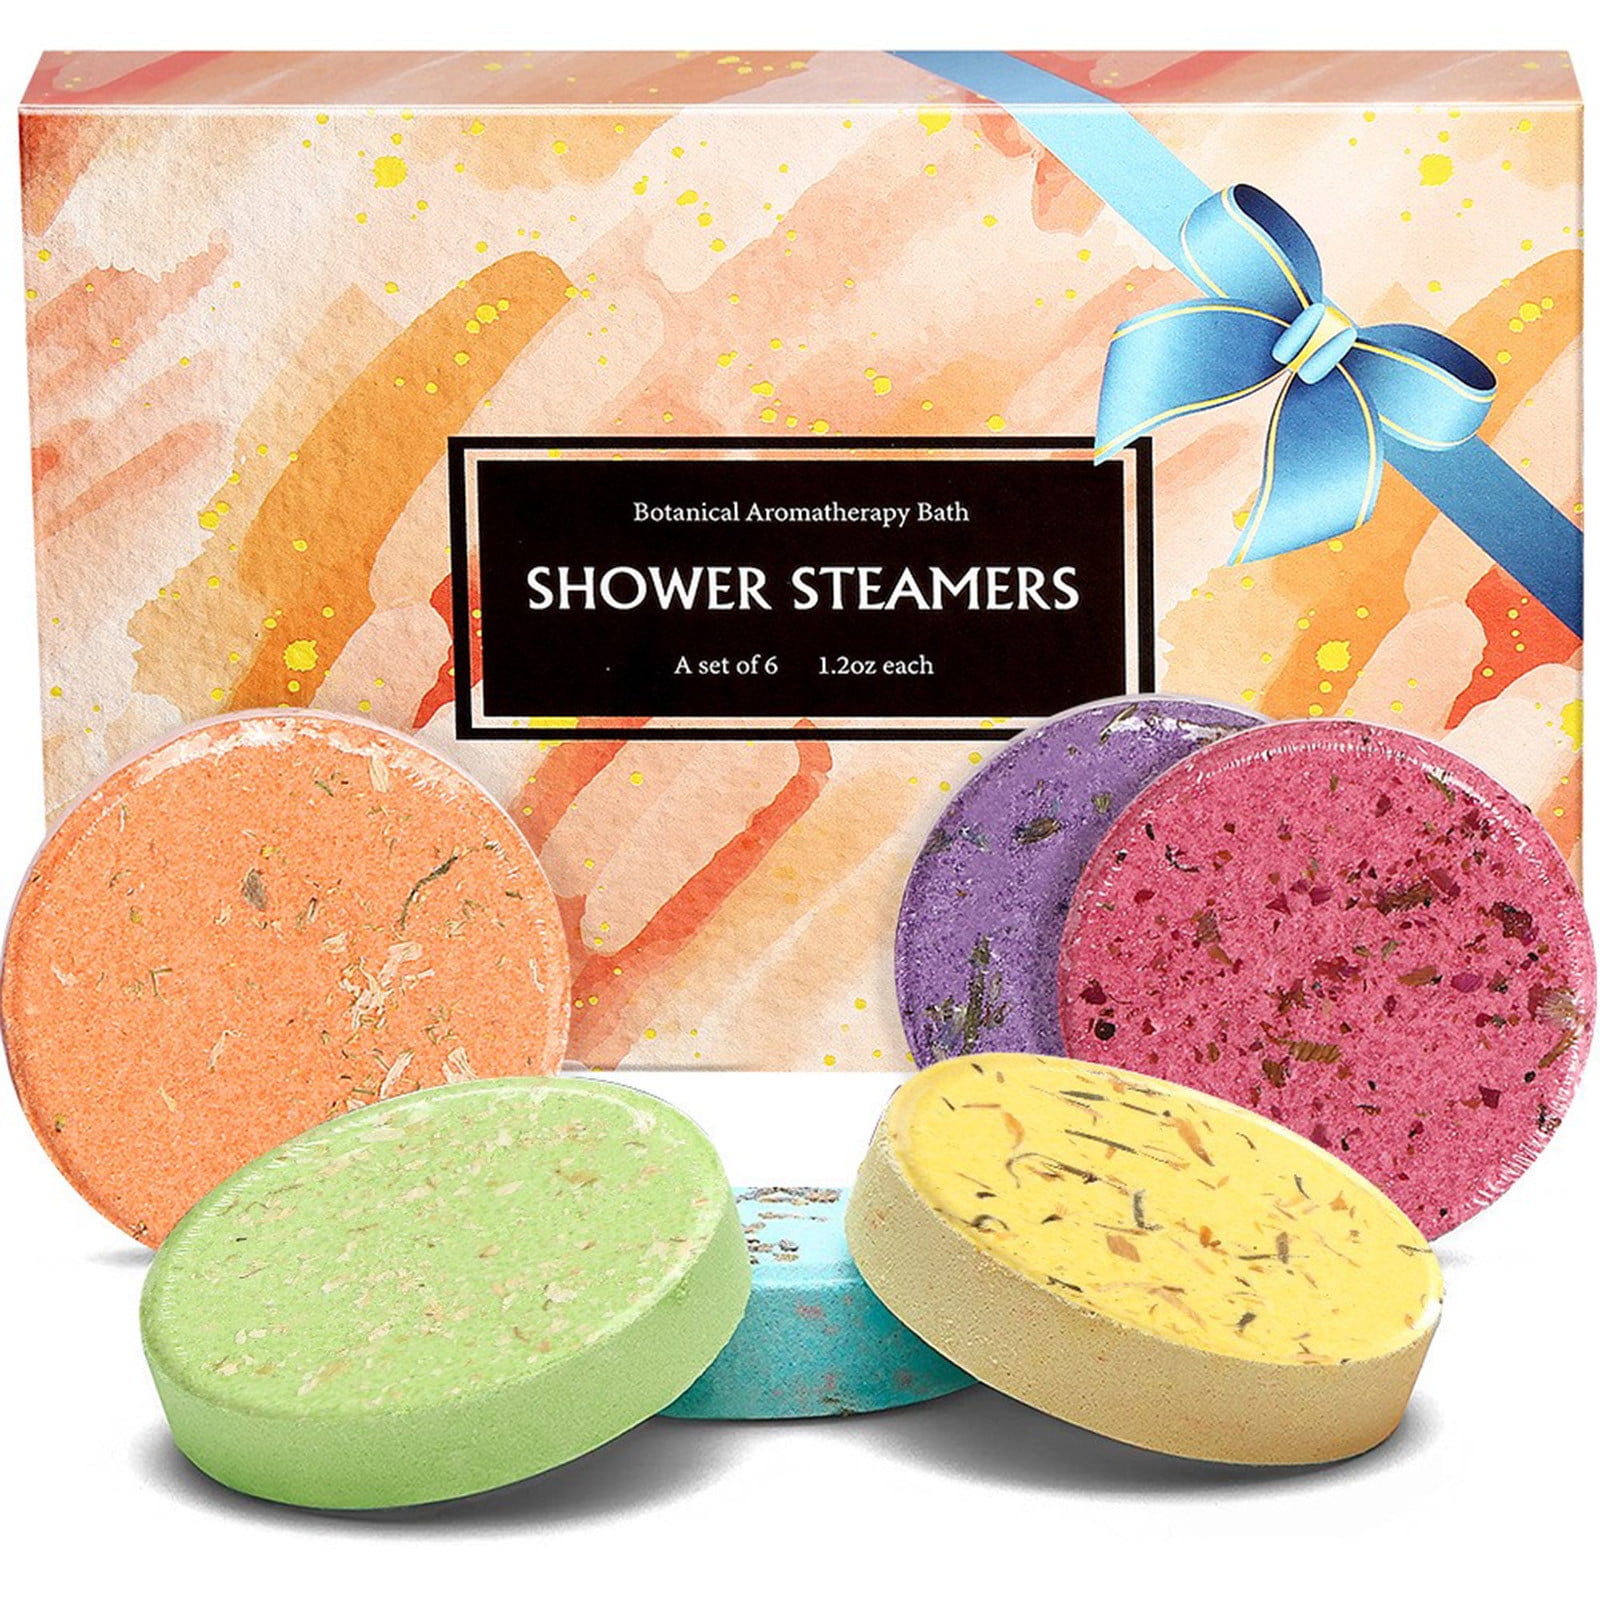 Body Restore Bath Bombs Aromatherapy 6 Pack - Christmas Gifts Stocking  Stuffers, Relaxation Birthday Gifts for Women and Men, Stress Relief and  Luxury Self Care - Chamomile